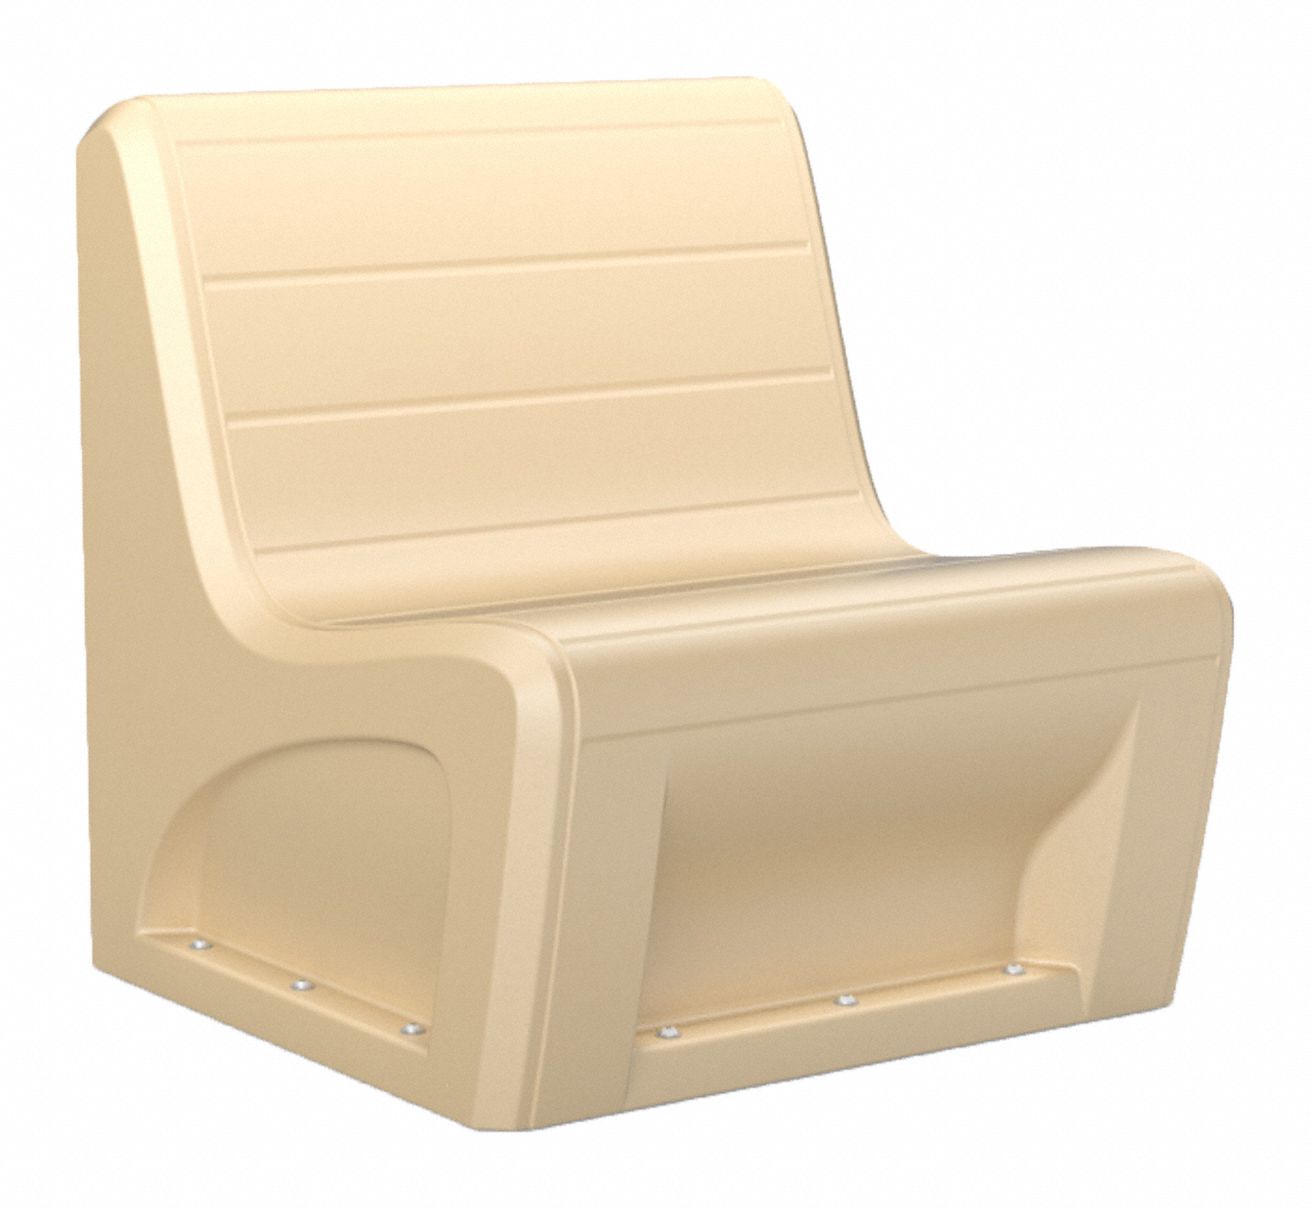 Sabre Sectional Chair Sand: 30 1/2 in Wd, 32 in Lg, 33 in Ht, 500 lb Wt Capacity, Sand